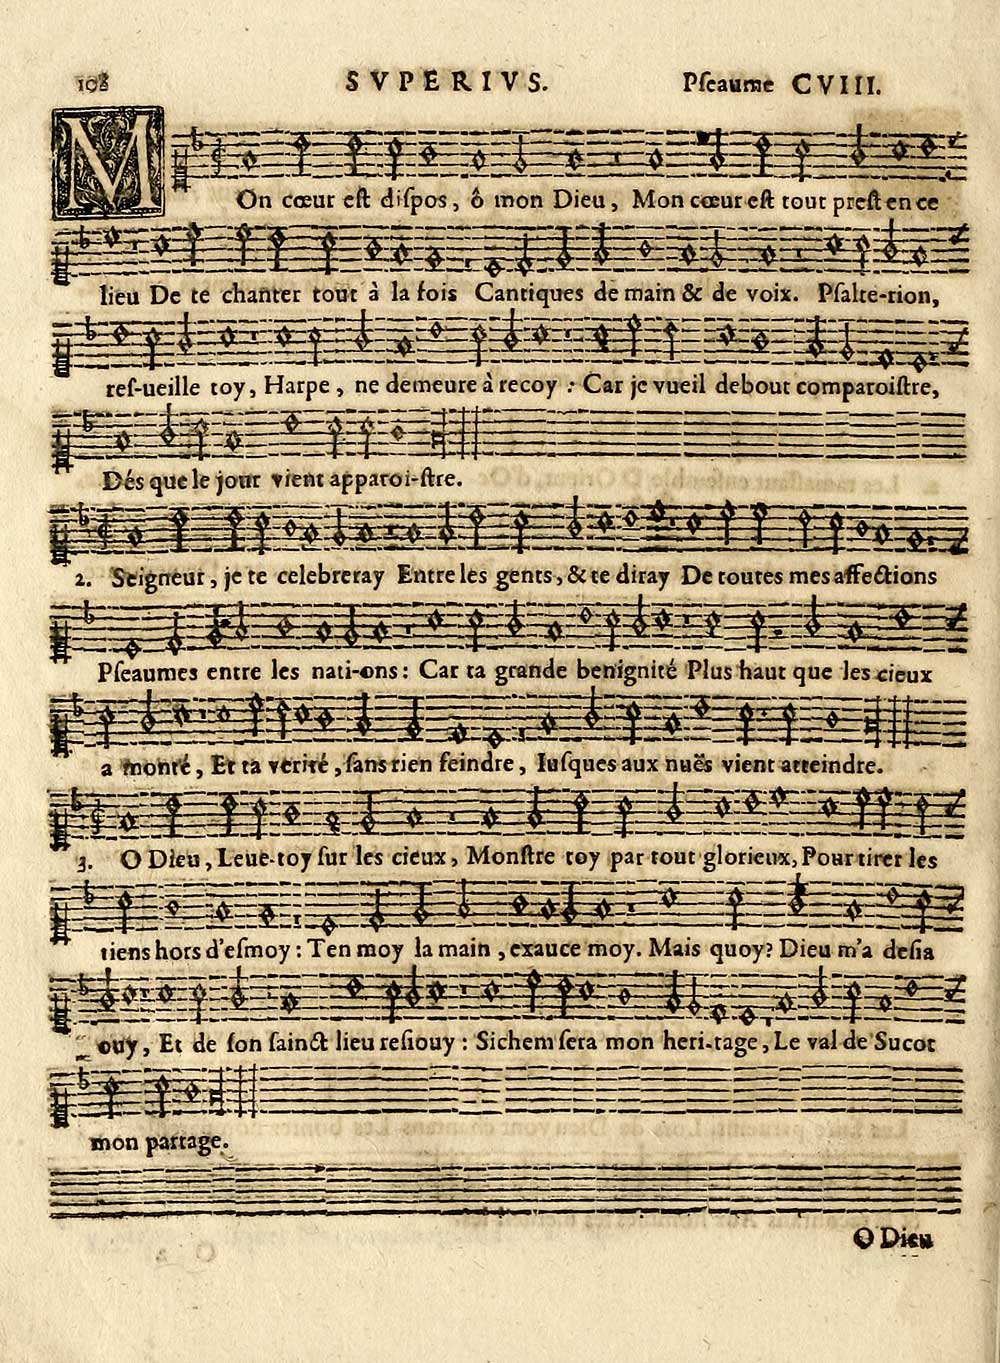 1 Page 108 Mon Cœur Est Dispos O Mon Dieu Inglis Collection Of Printed Music Printed Music Pseaumes De David Special Collections Of Printed Music National Library Of Scotland